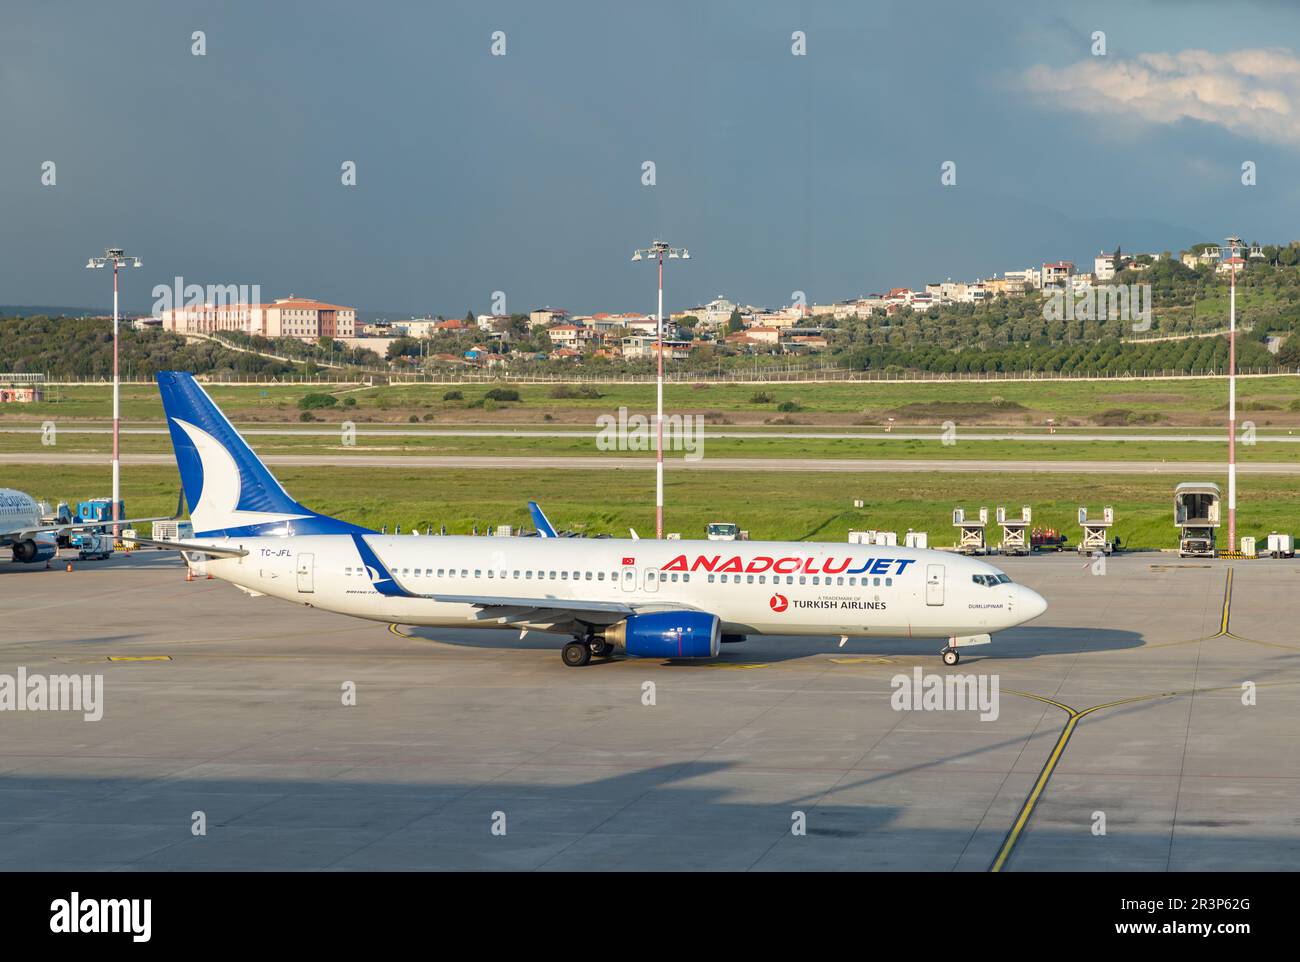 A picture of an AnadoluJet plane. Stock Photo